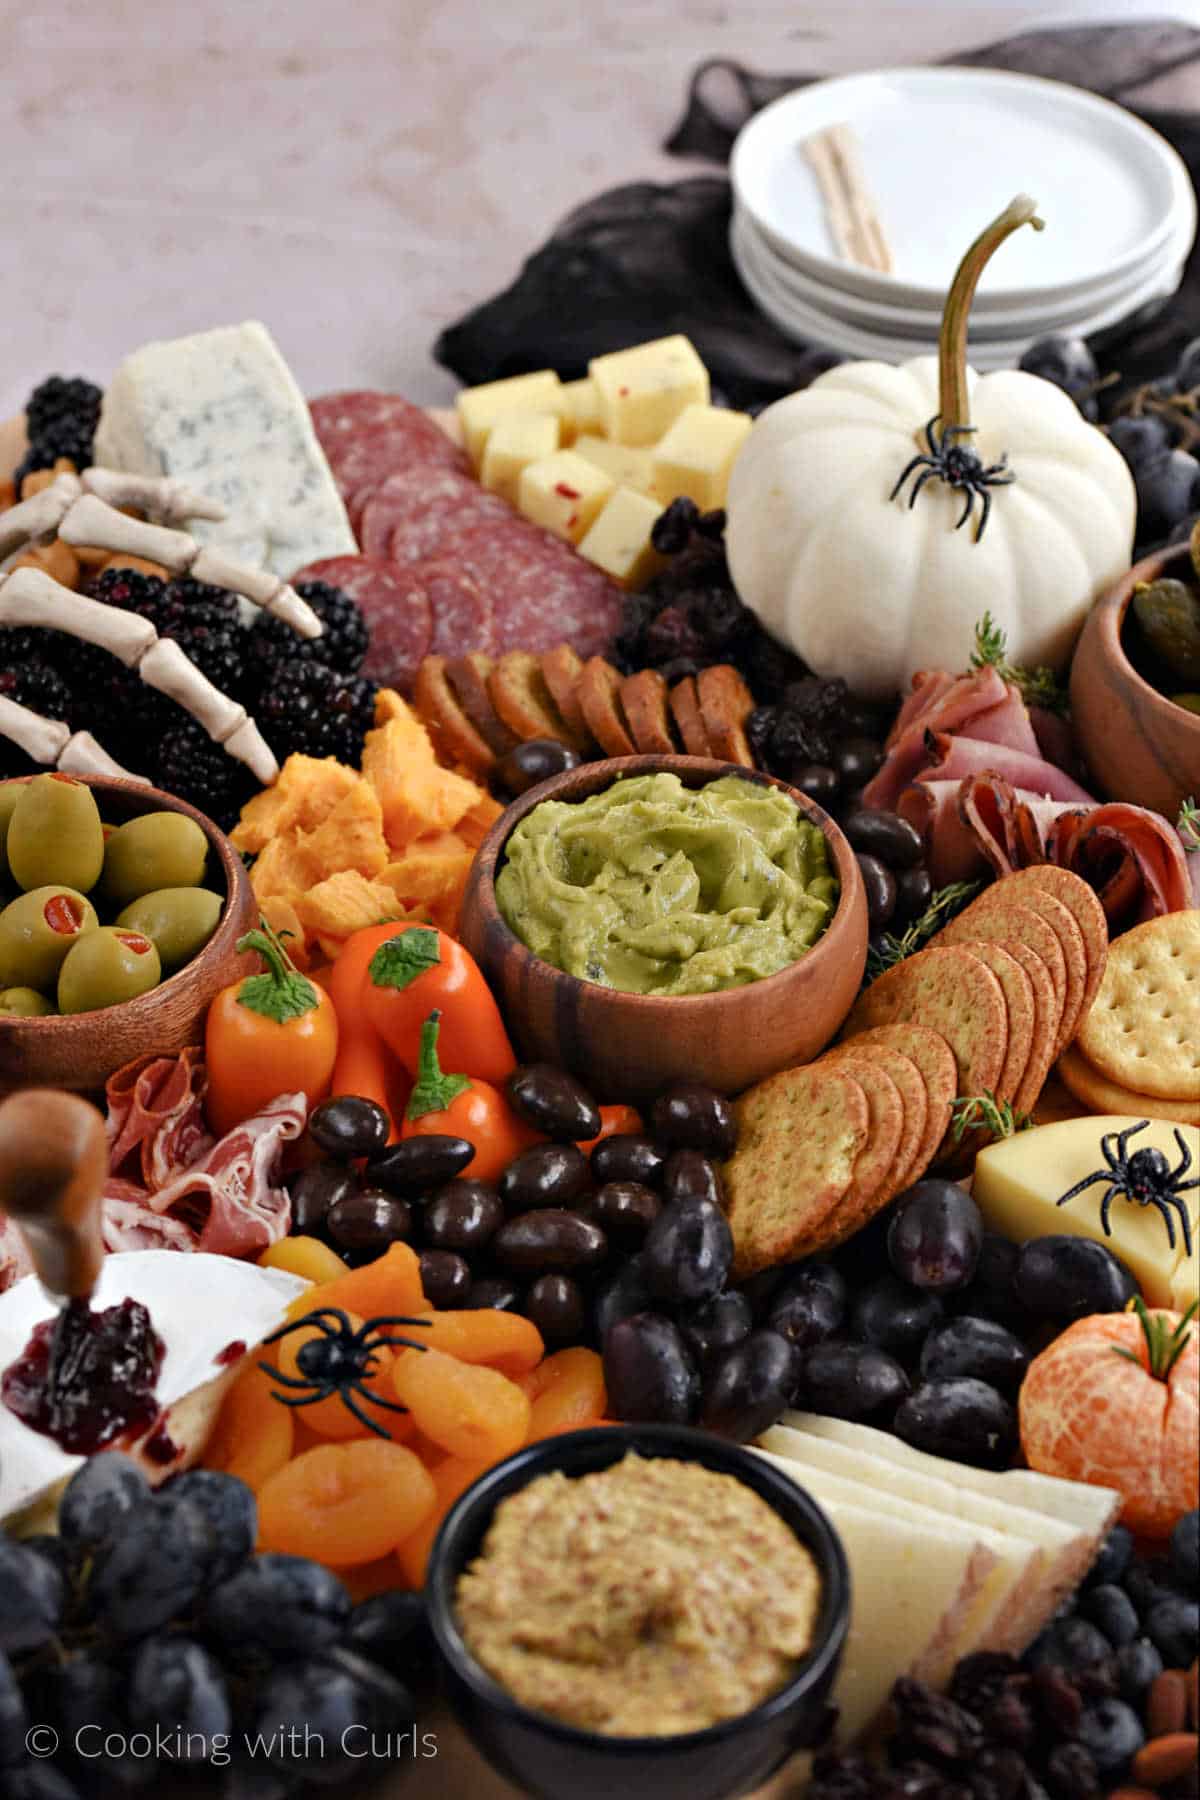 Halloween charcuterie board with meats, cheeses, and other snacks.